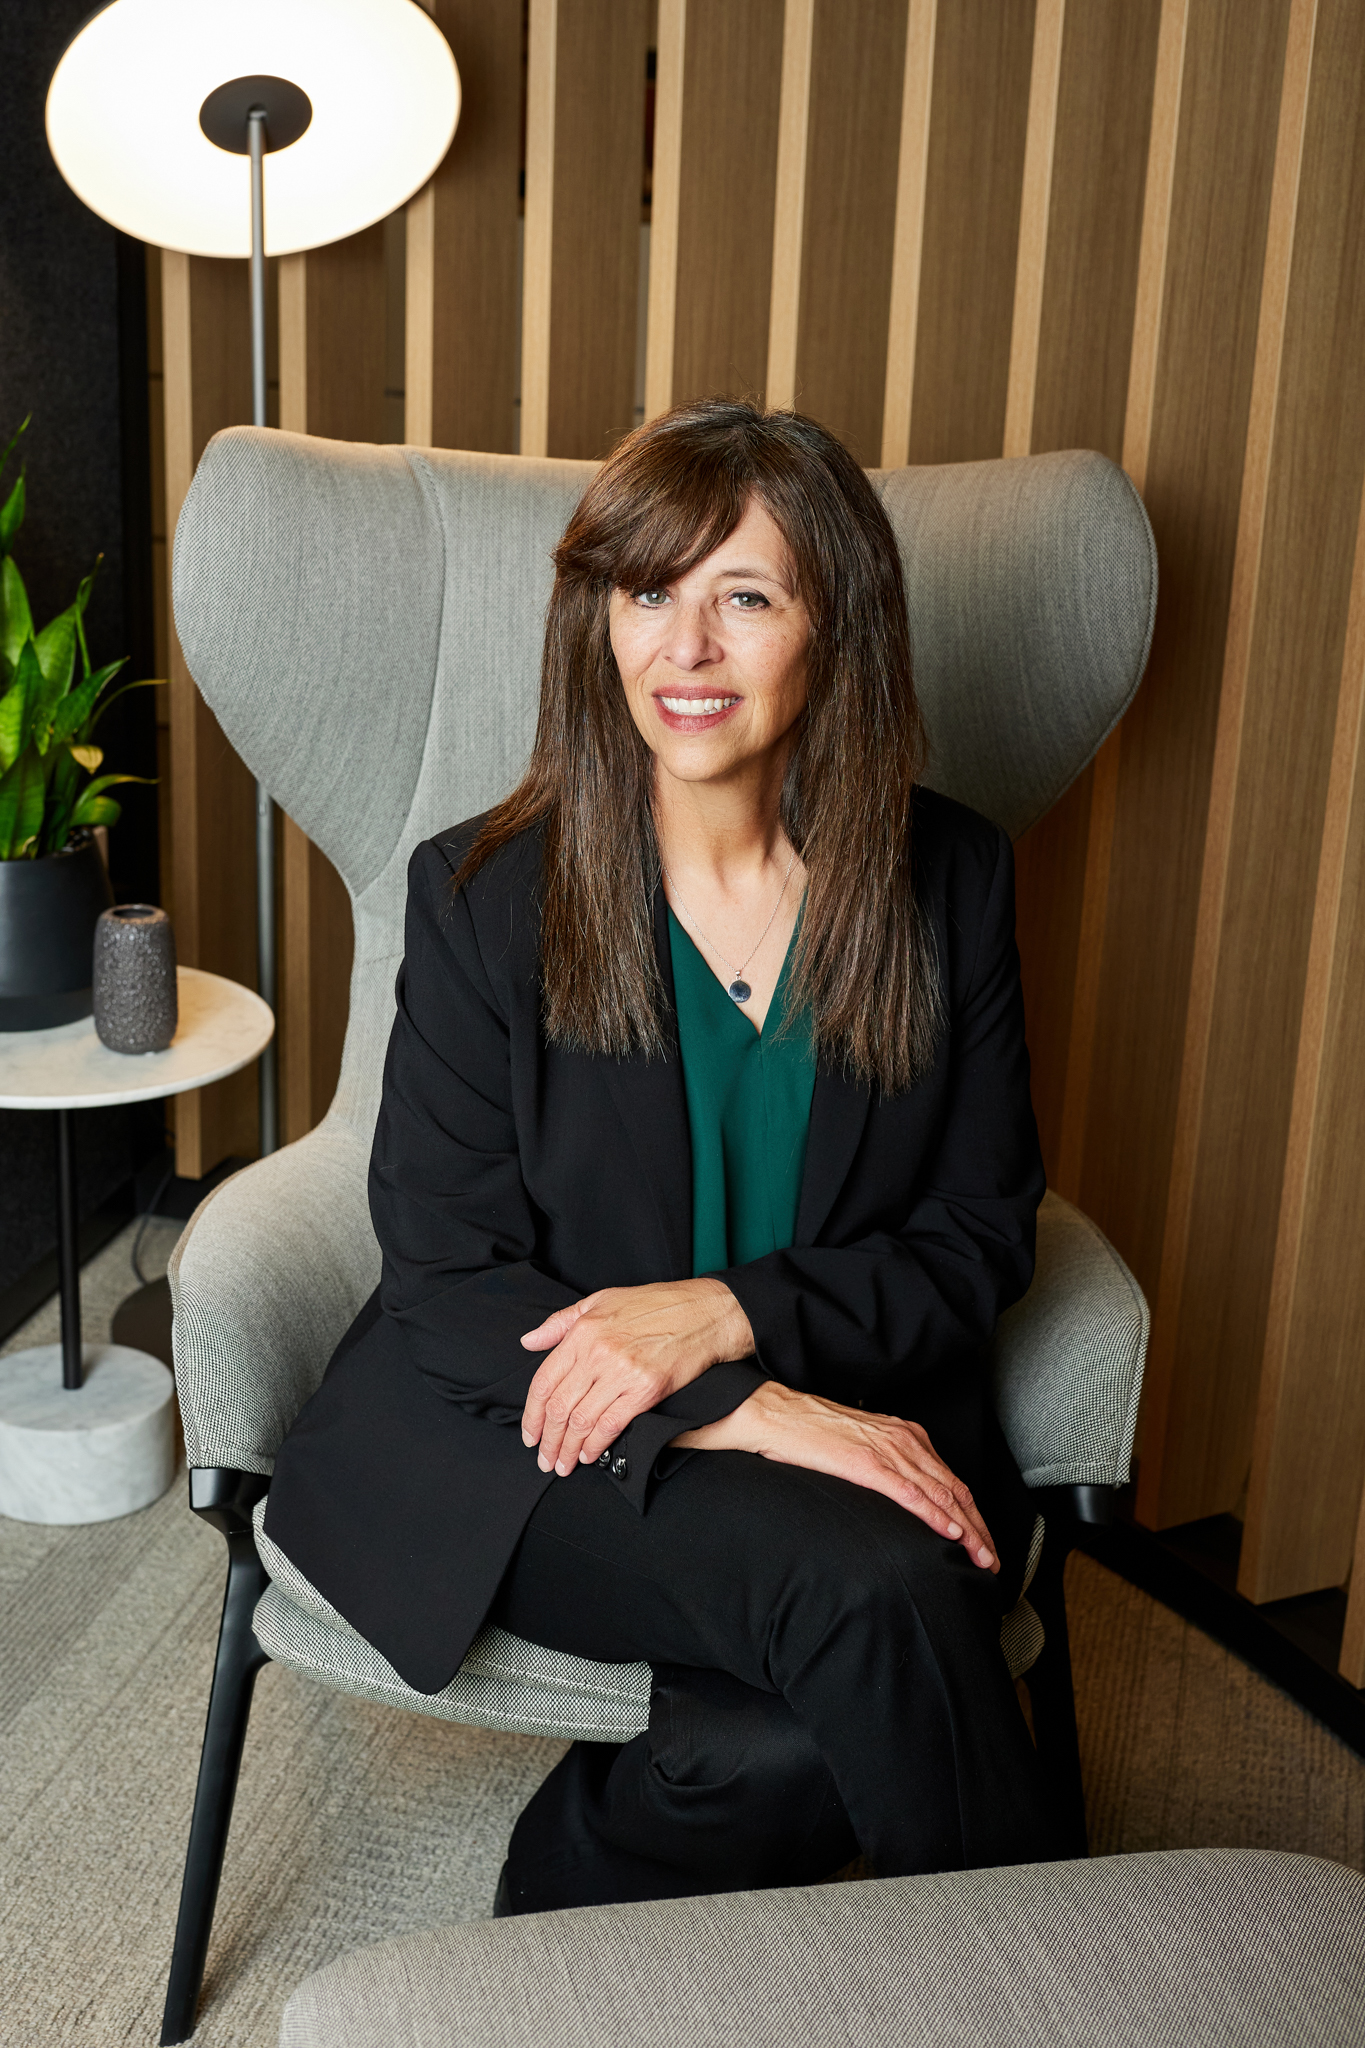 A woman in a business suit sitting on a chair captured in event photography.